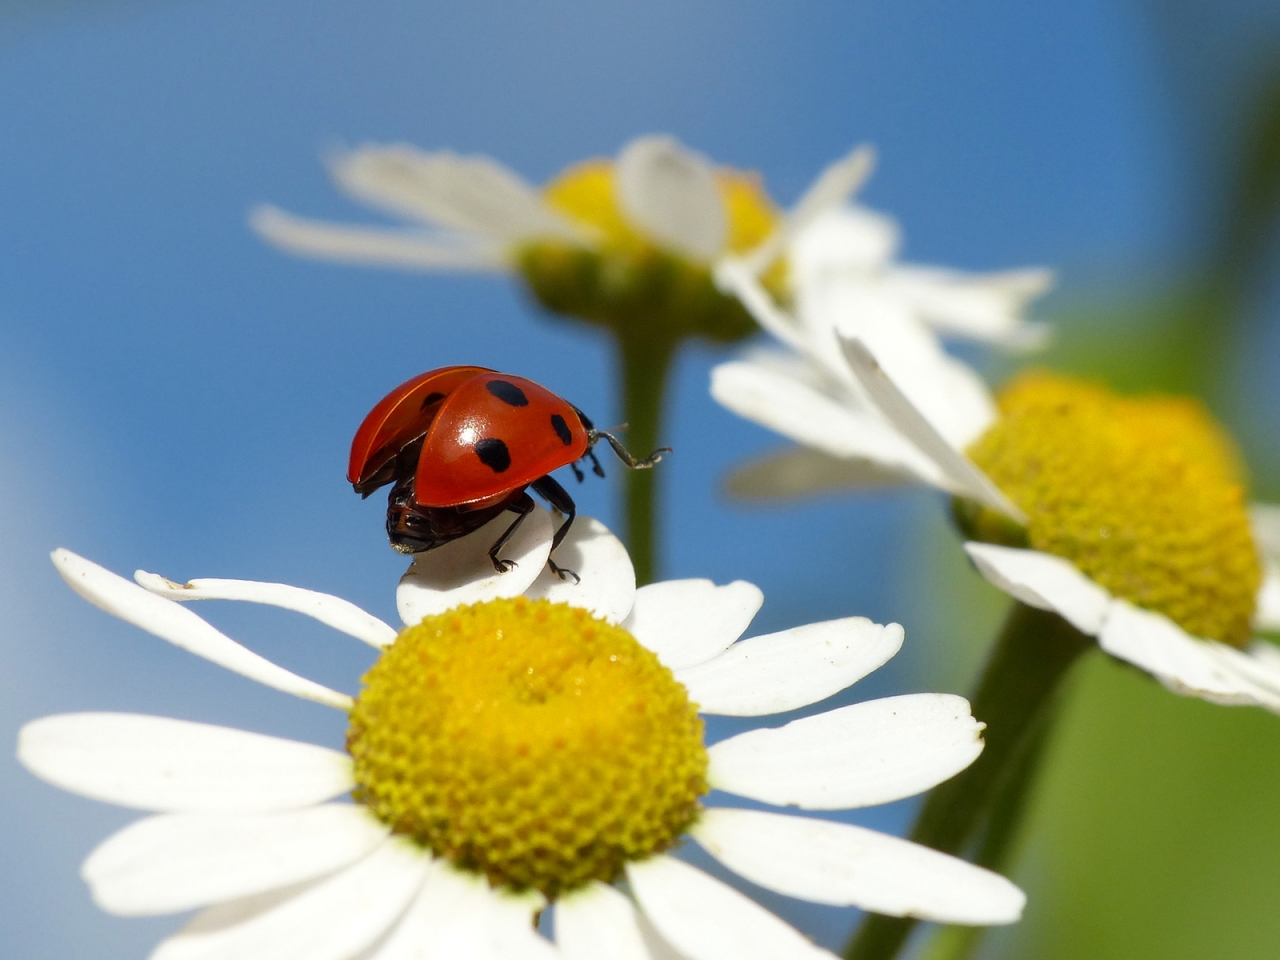 Ladybug on a Chamomile Flower for 1280 x 960 resolution